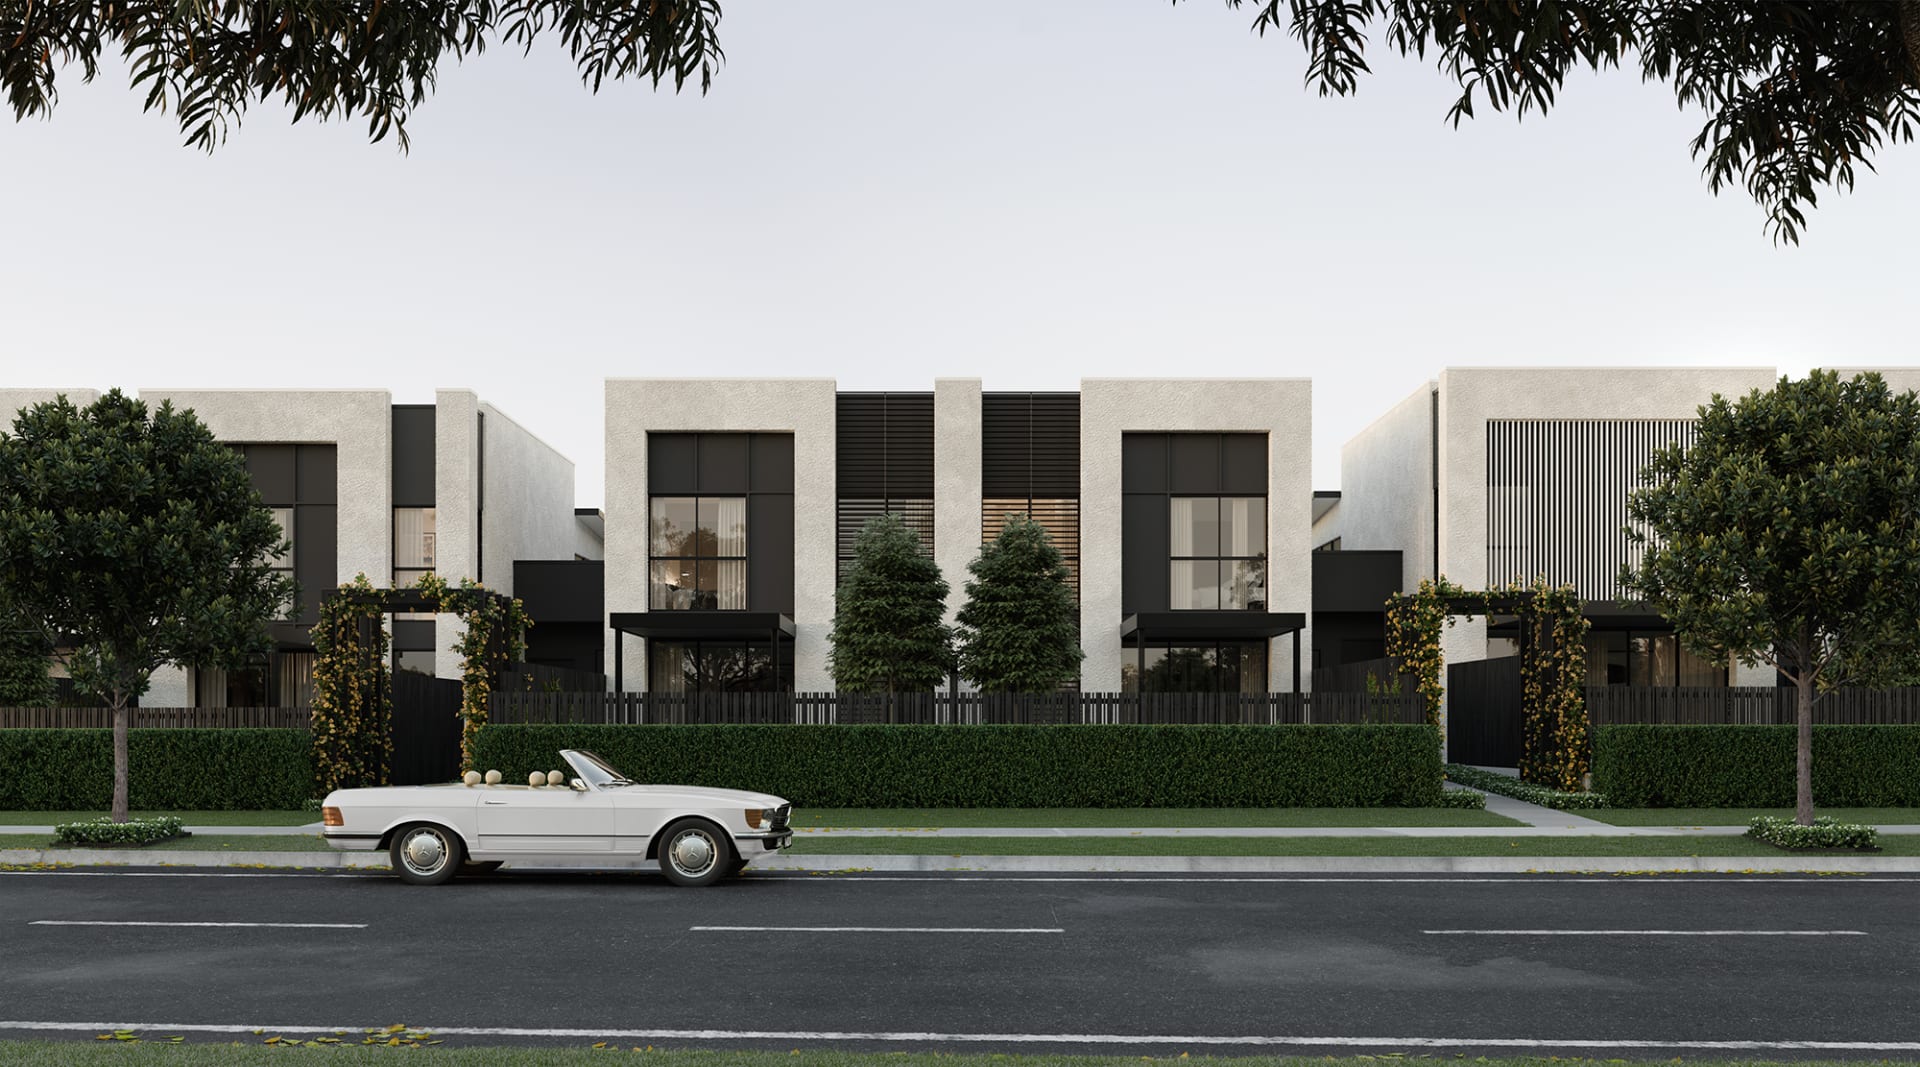 Dawn Edition terraces launched as part of Helensvale's $500 million The Surrounds community